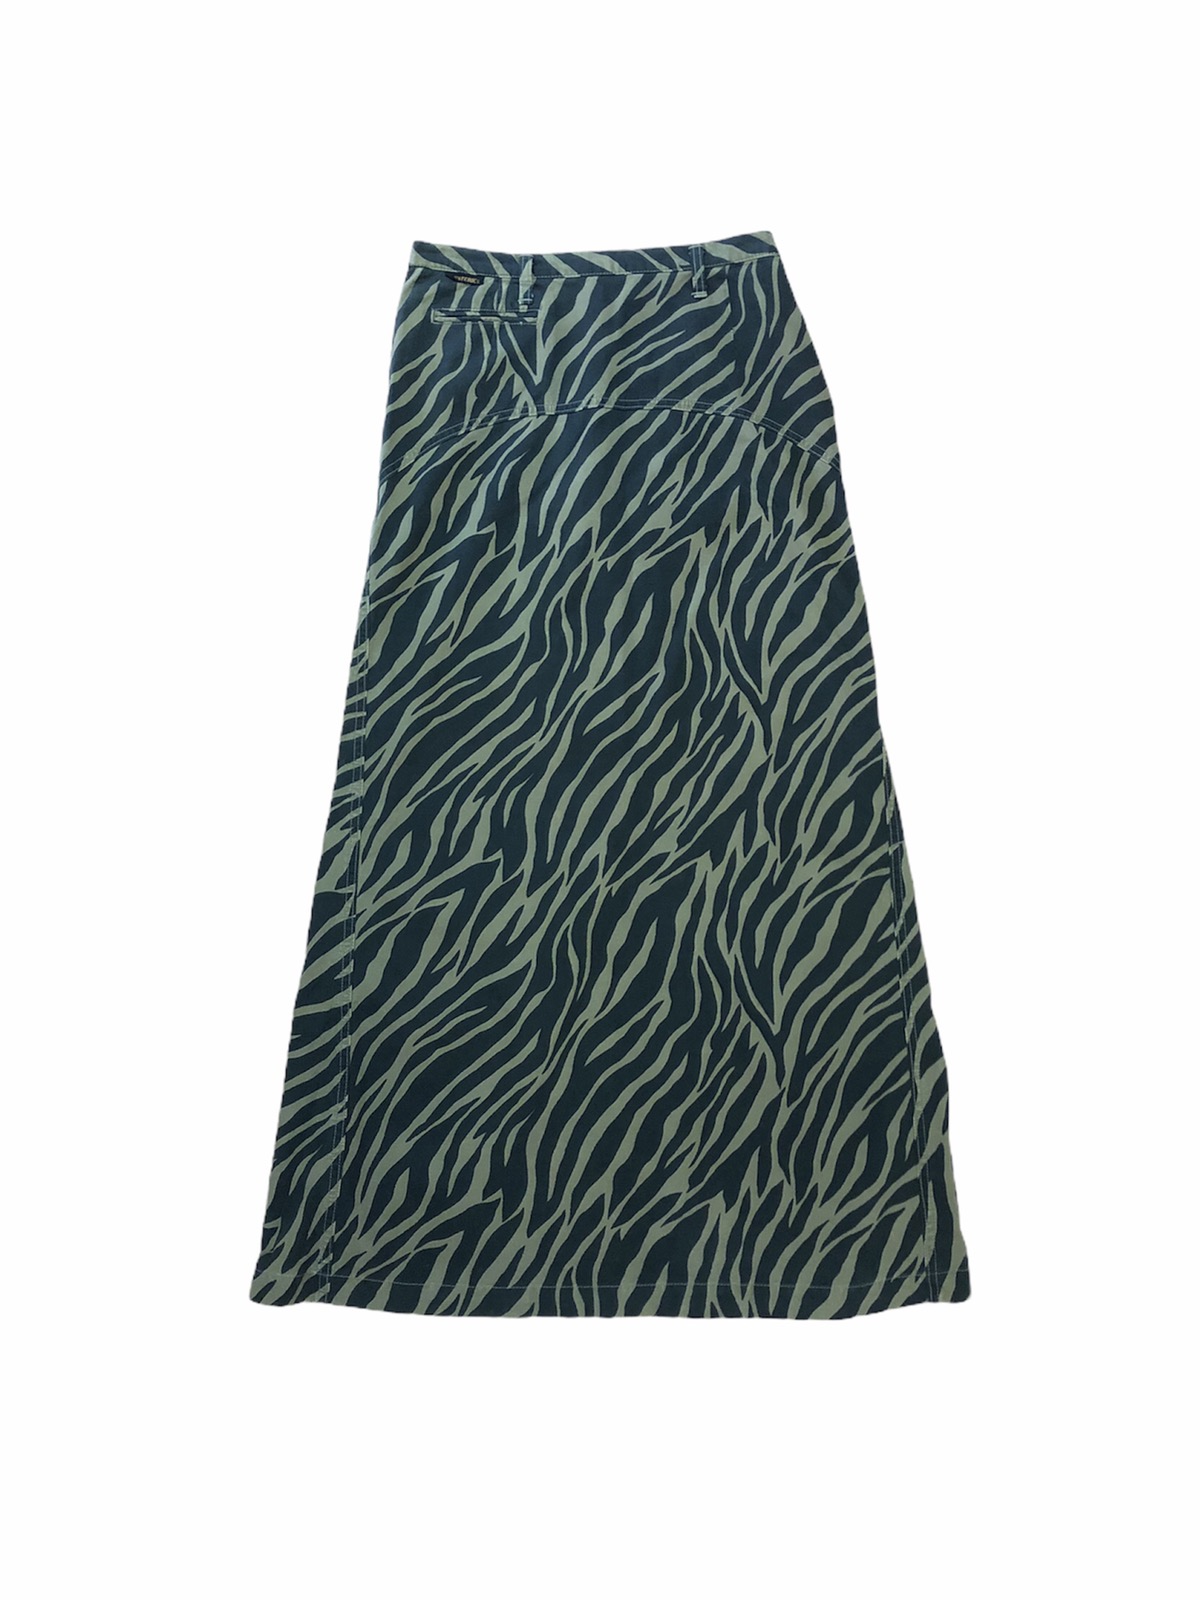 Hysteric Glamour - Hysteric Glamour tiger stripe midi skirt - 1